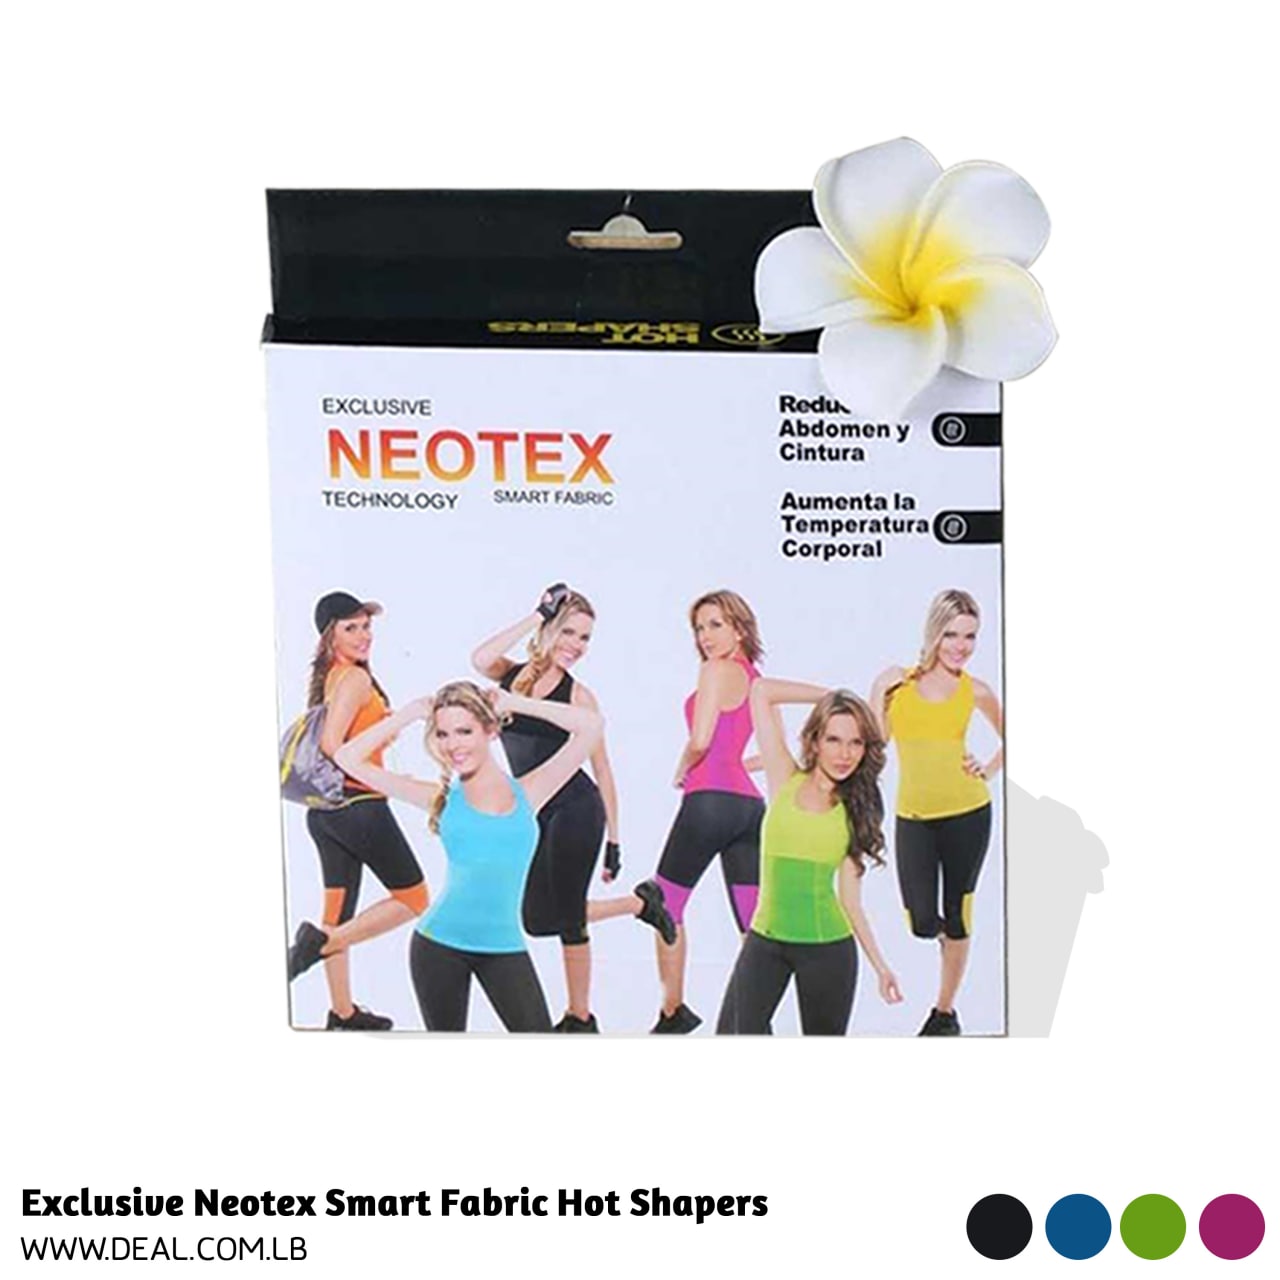 Exclusive+Neotex+Smart+Fabric+Hot+Shapers